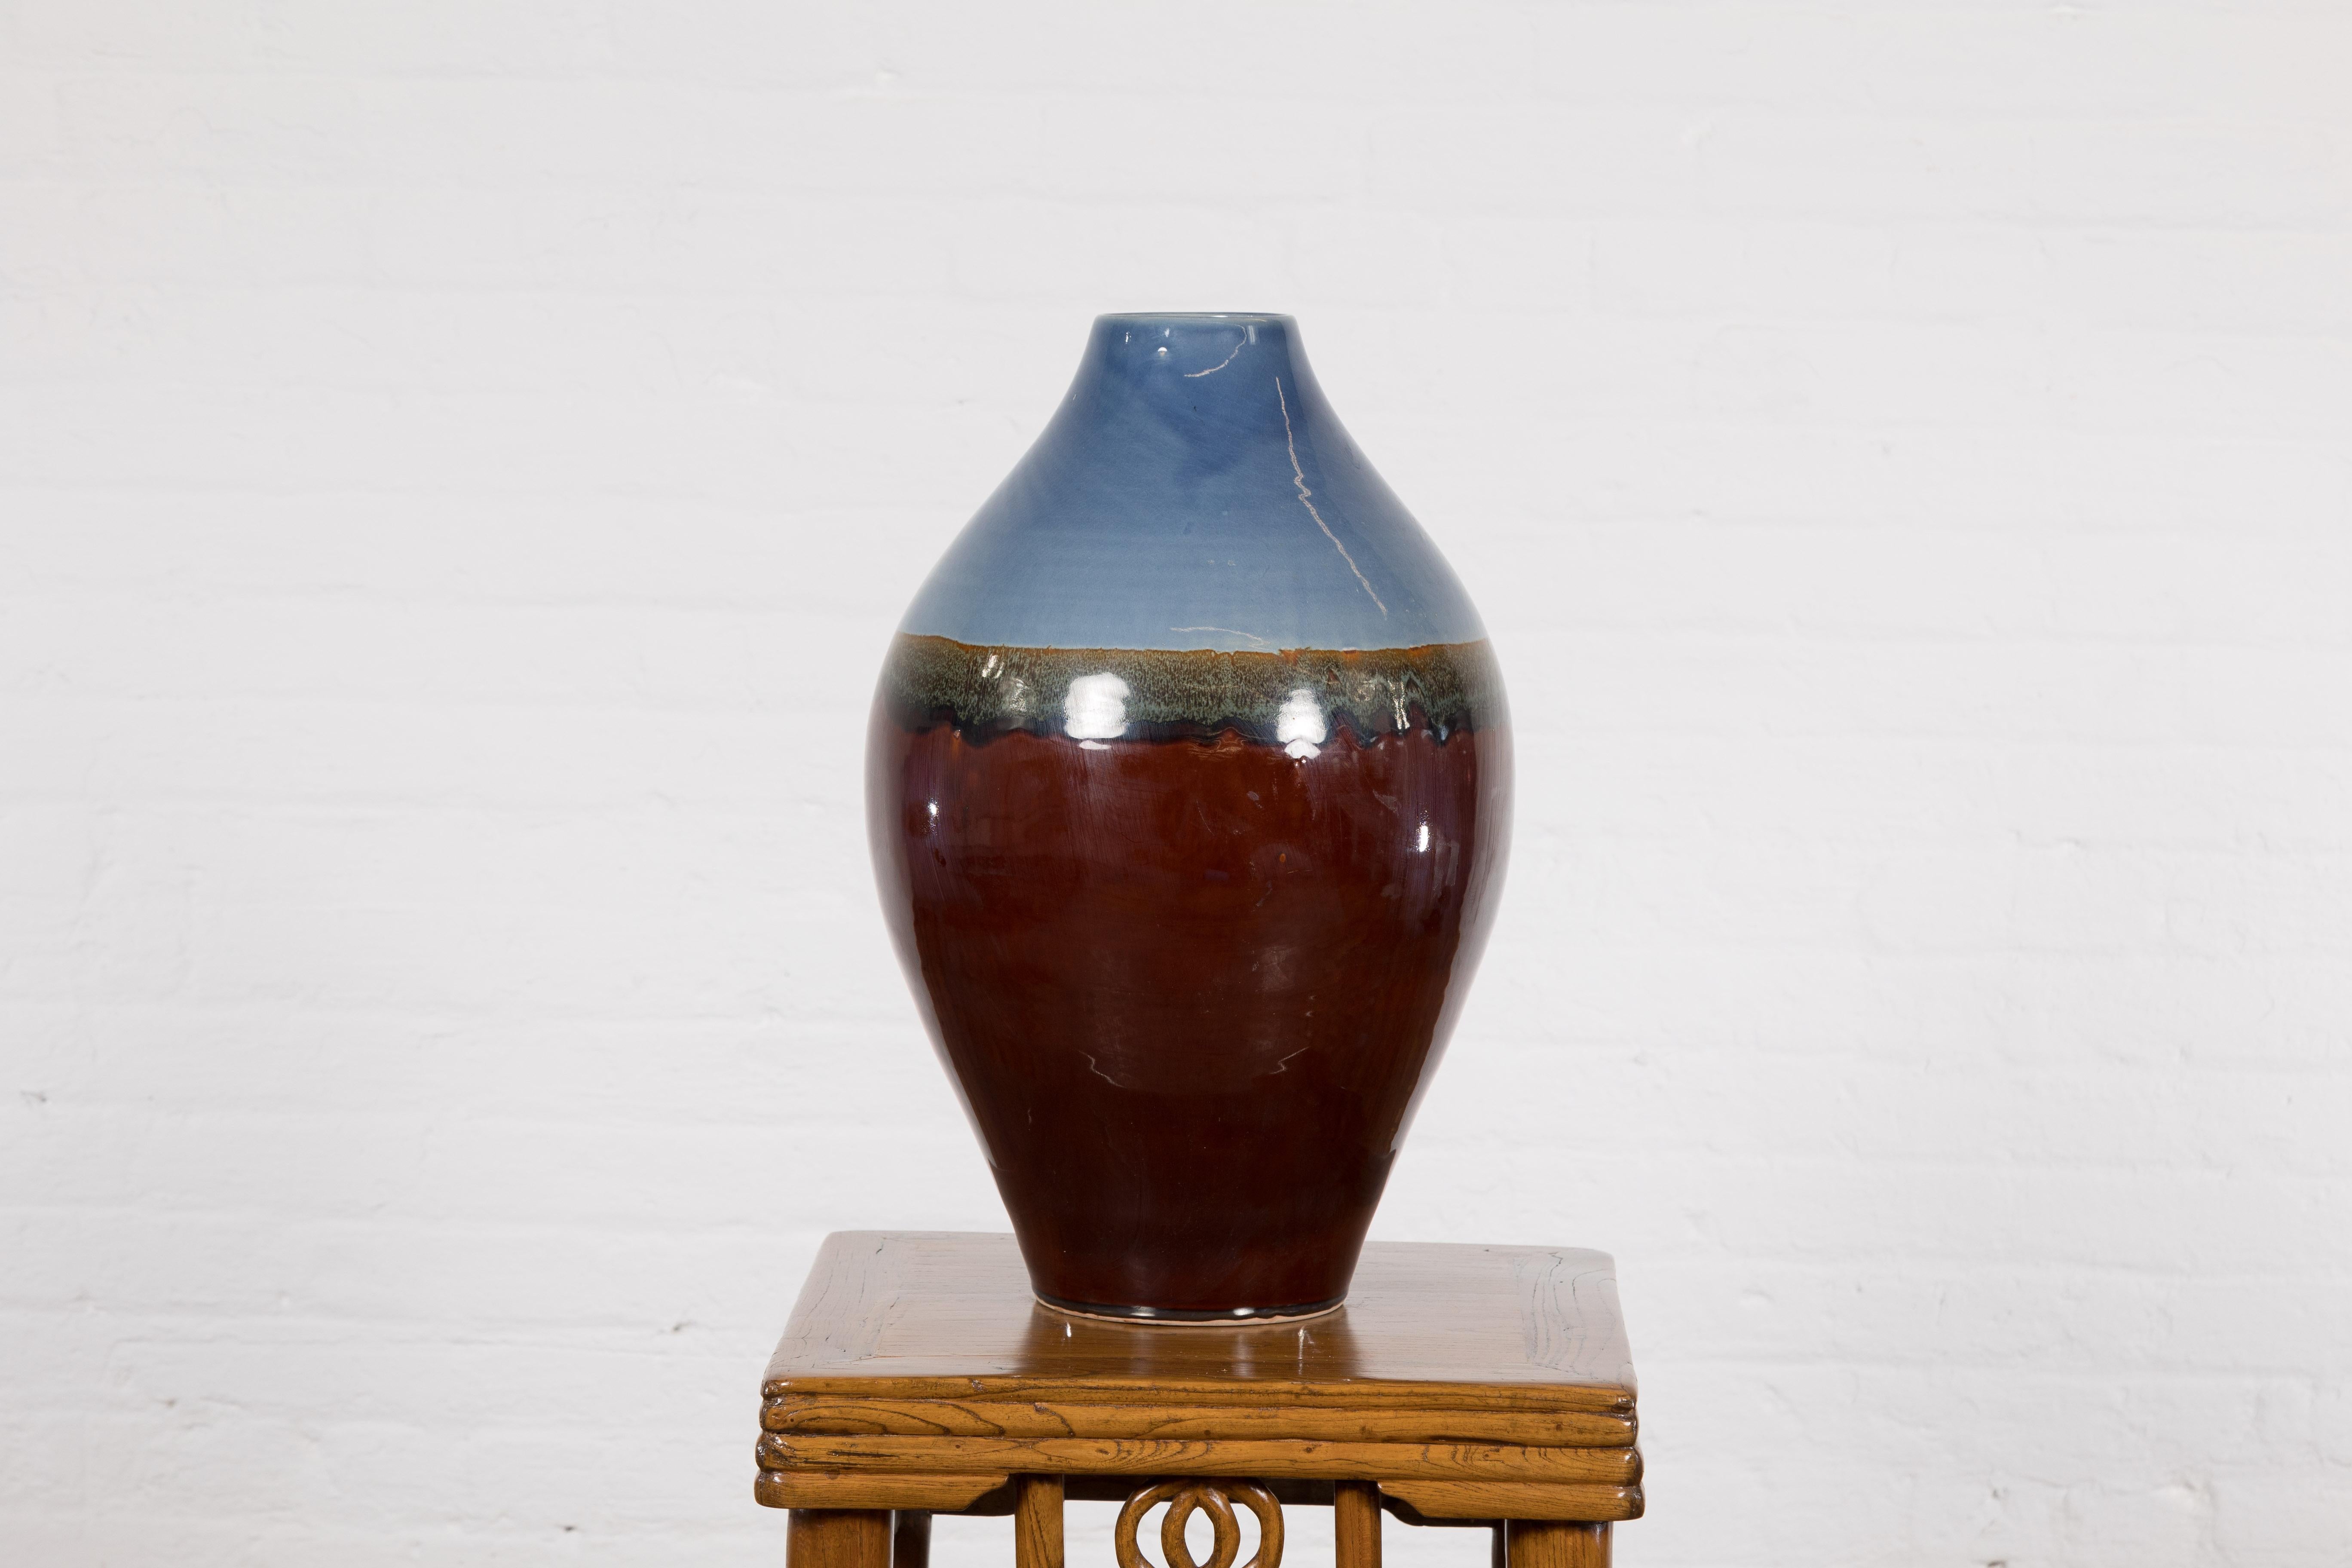 Contemporary Prem Collection ceramic vase with blue and reddish brown colors. Introducing an exquisite piece from the Prem Collection, this ceramic vase is an alchemy of colors and form, blending blue and reddish-brown hues to create an eye-catching